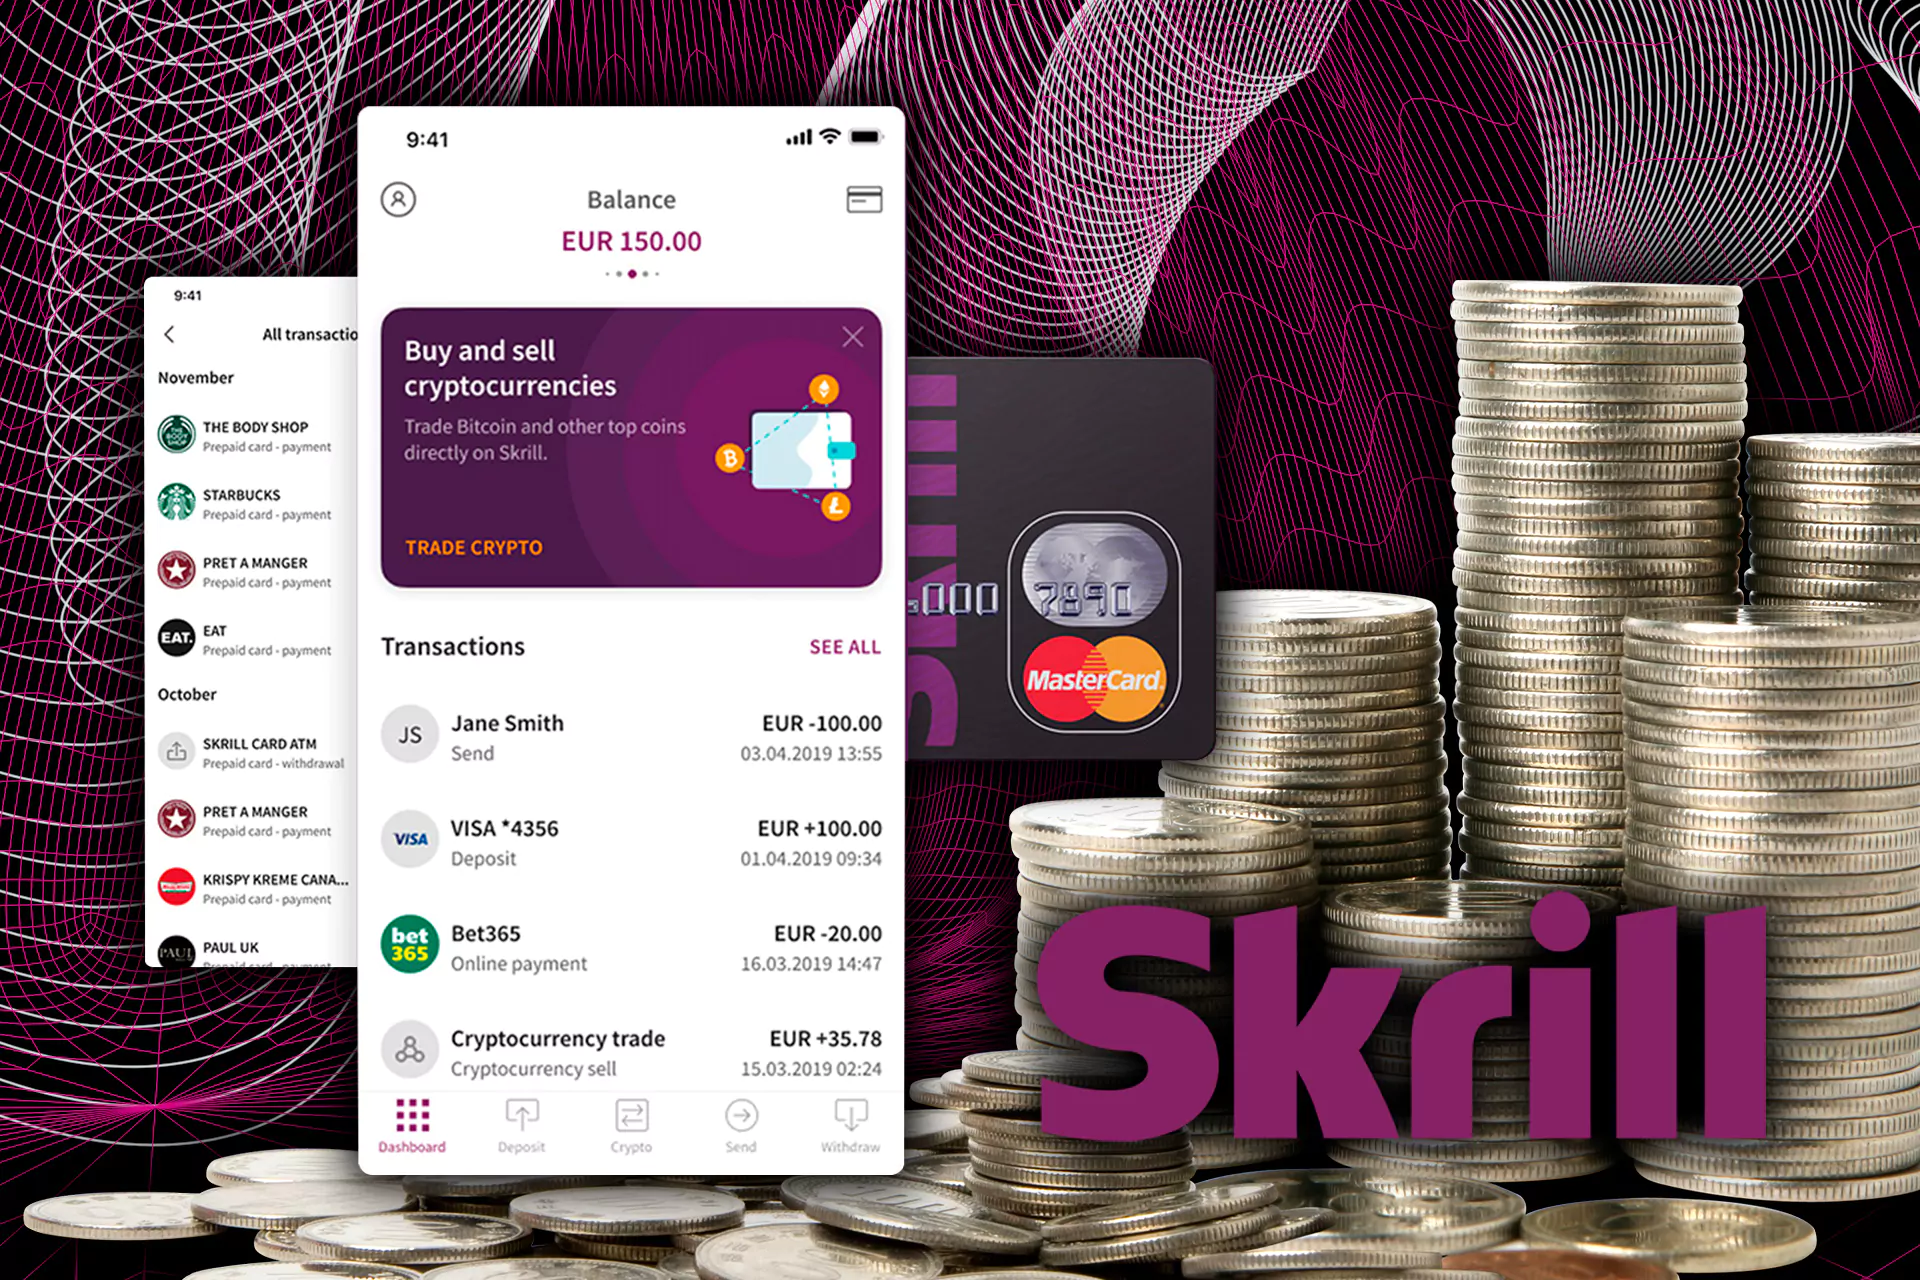 Skrill is the most well-known payment system.